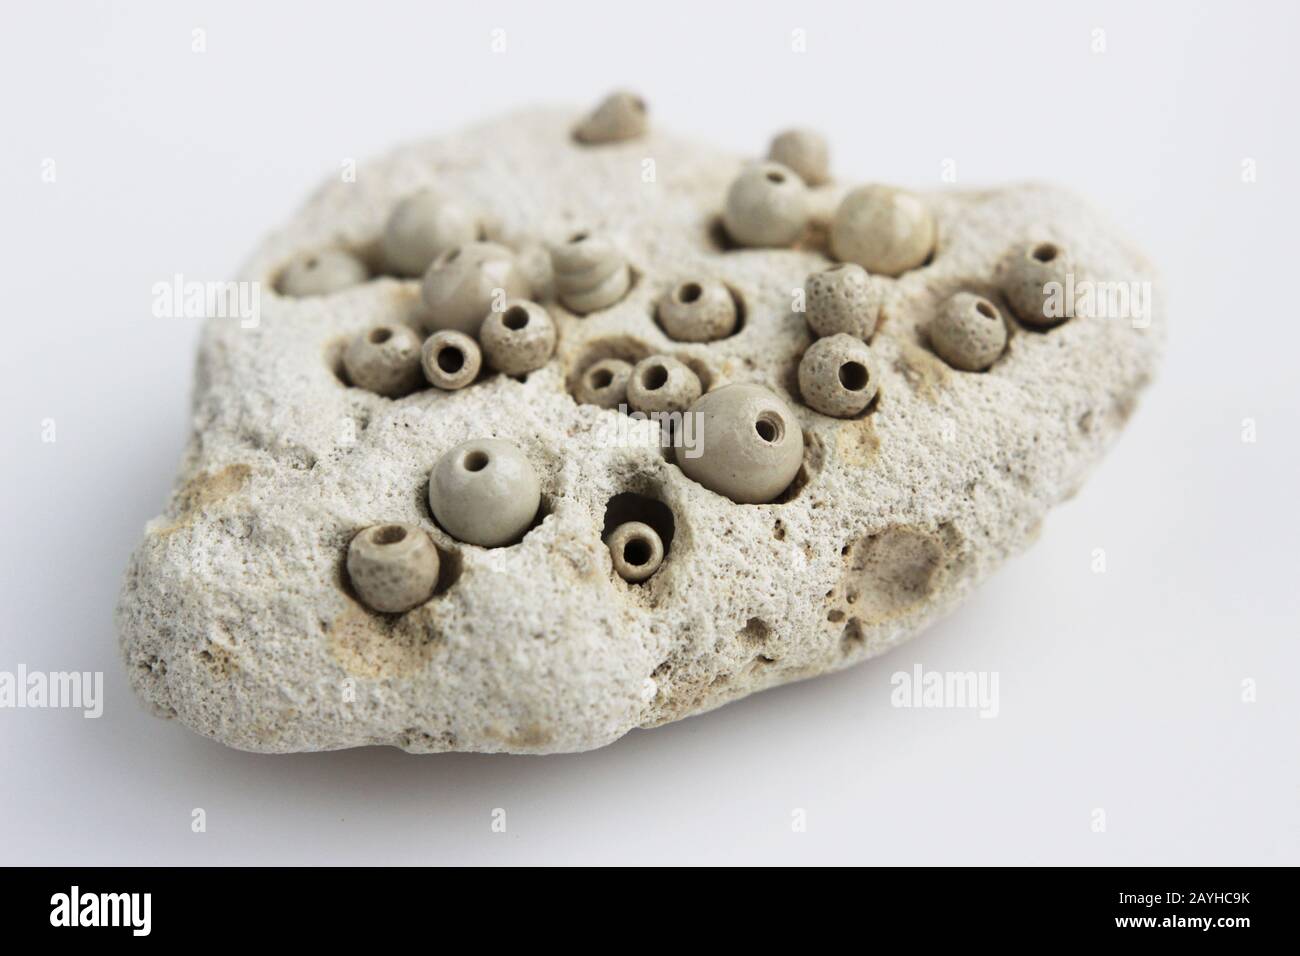 https://c8.alamy.com/comp/2AYHC9K/stones-with-holes-for-tripophobia-material-natural-stone-2AYHC9K.jpg